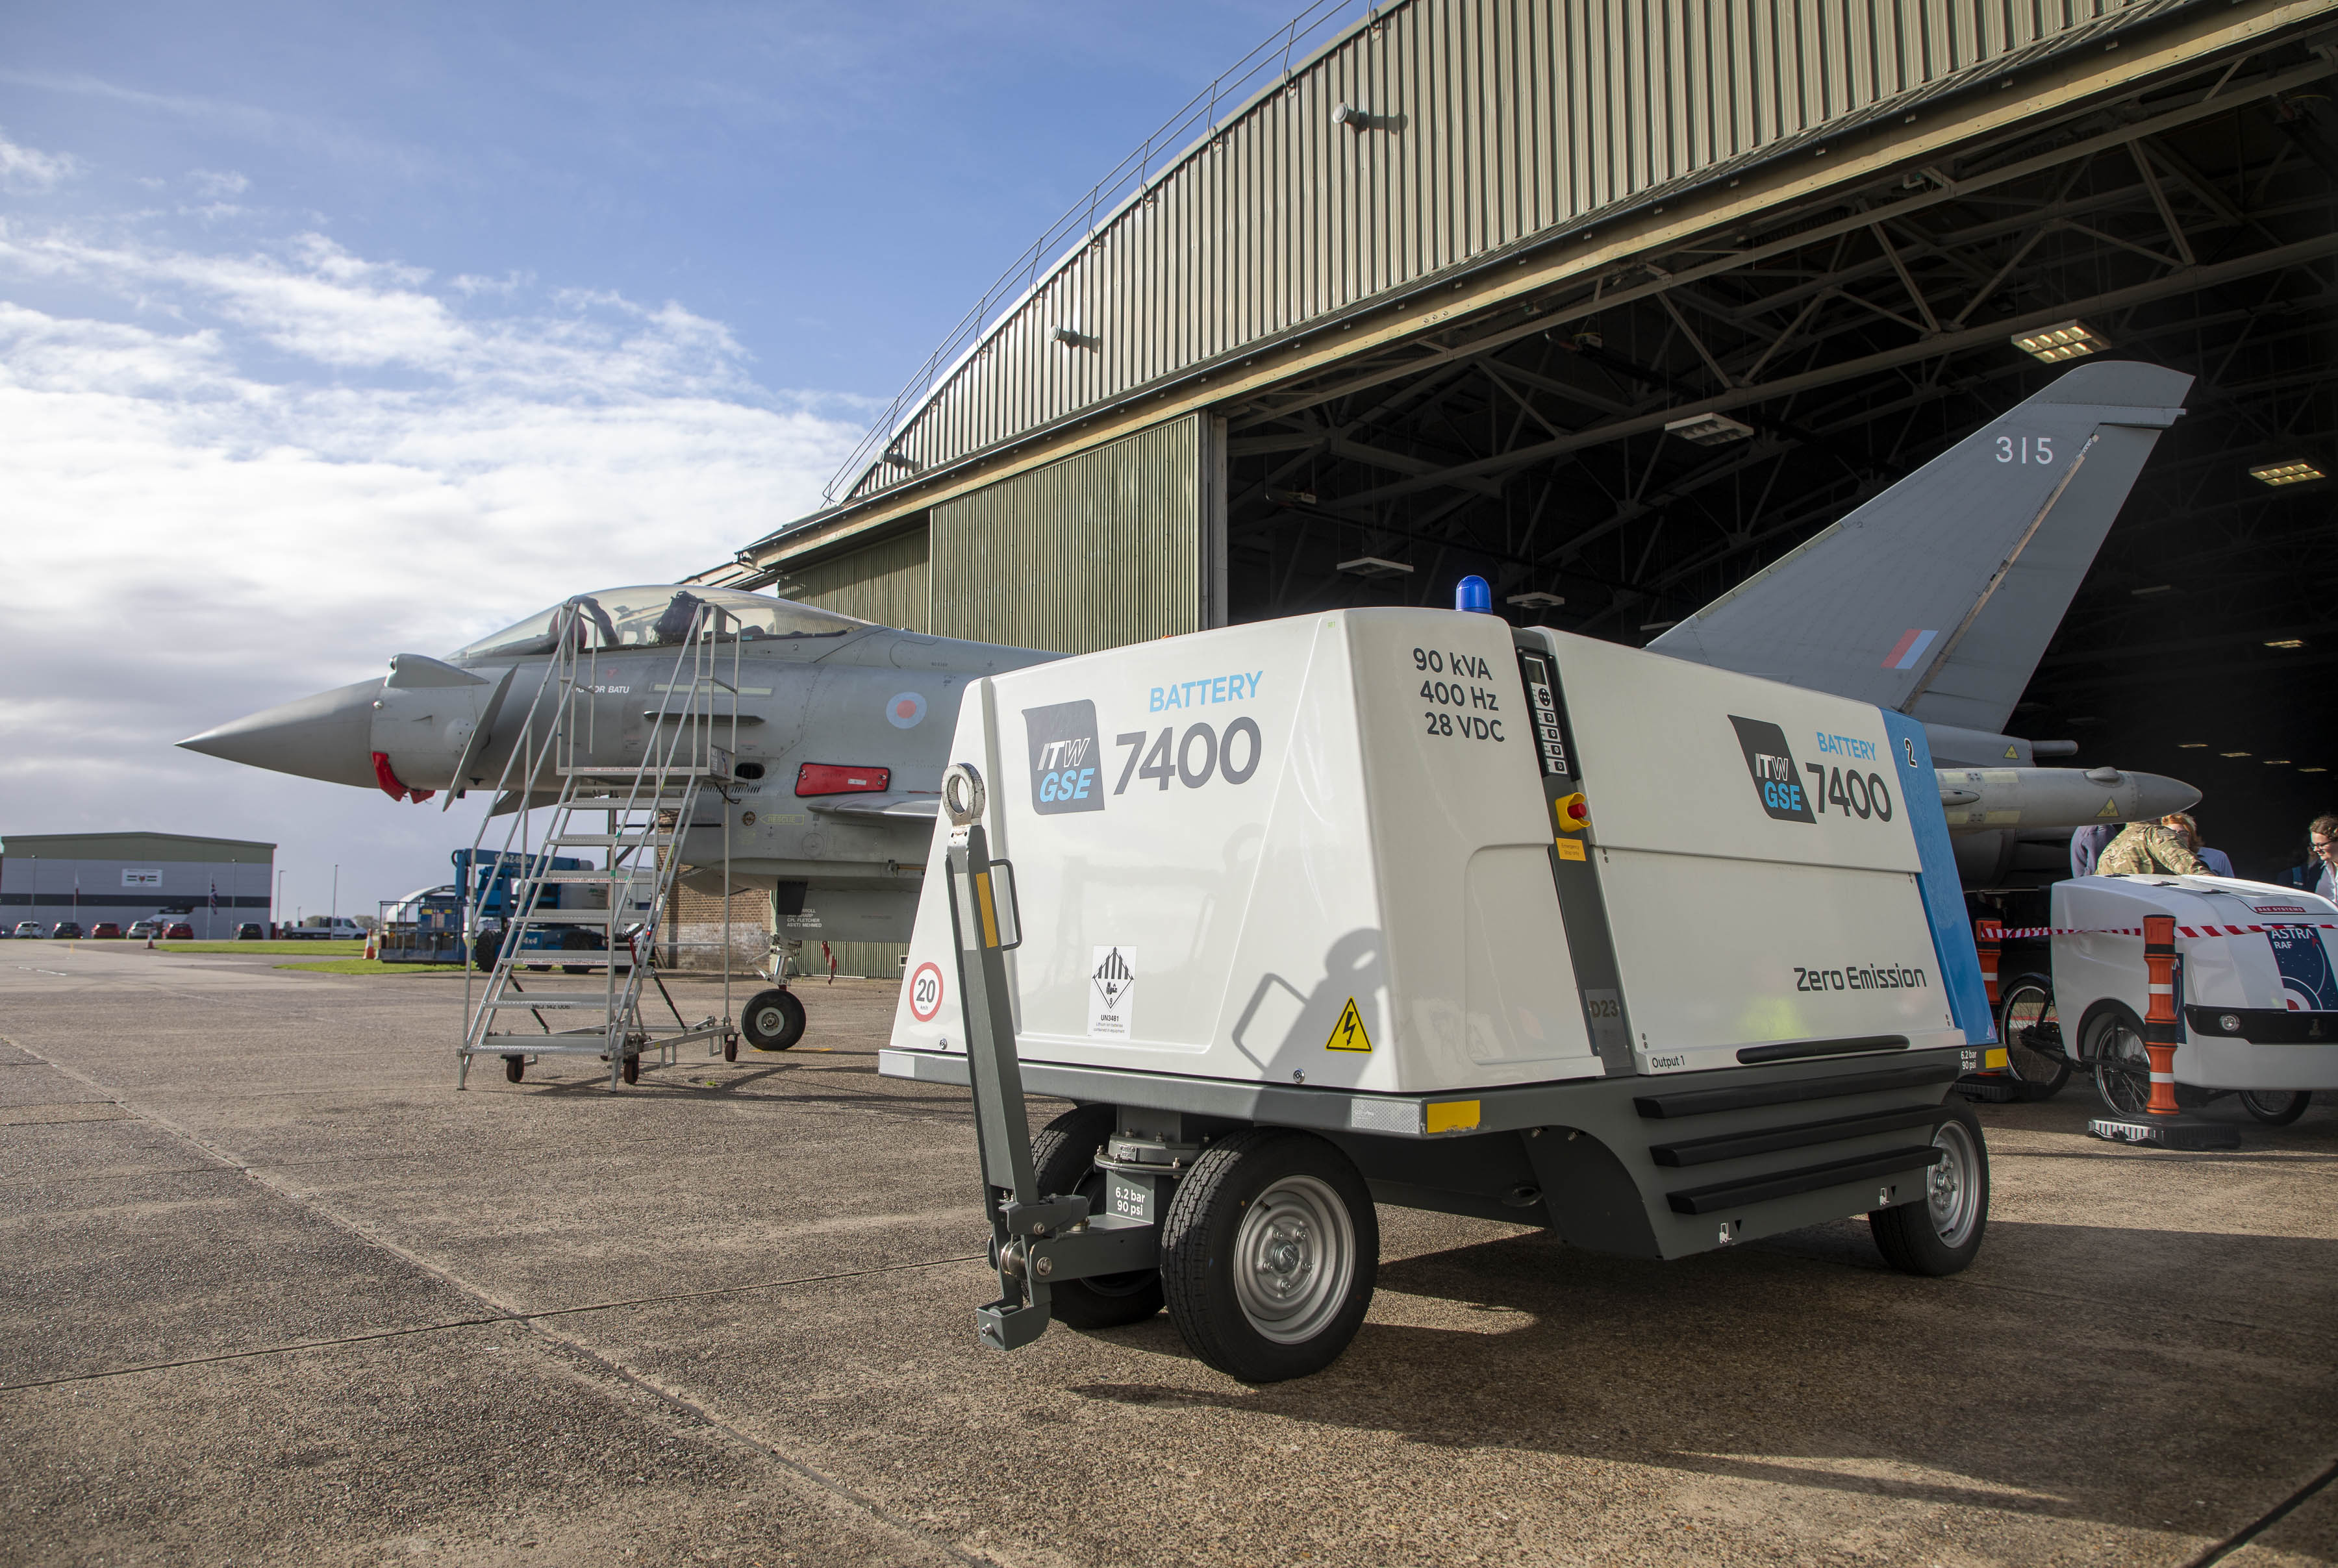 Image shows typhoon outside a hangar, with a large battery on wheels.